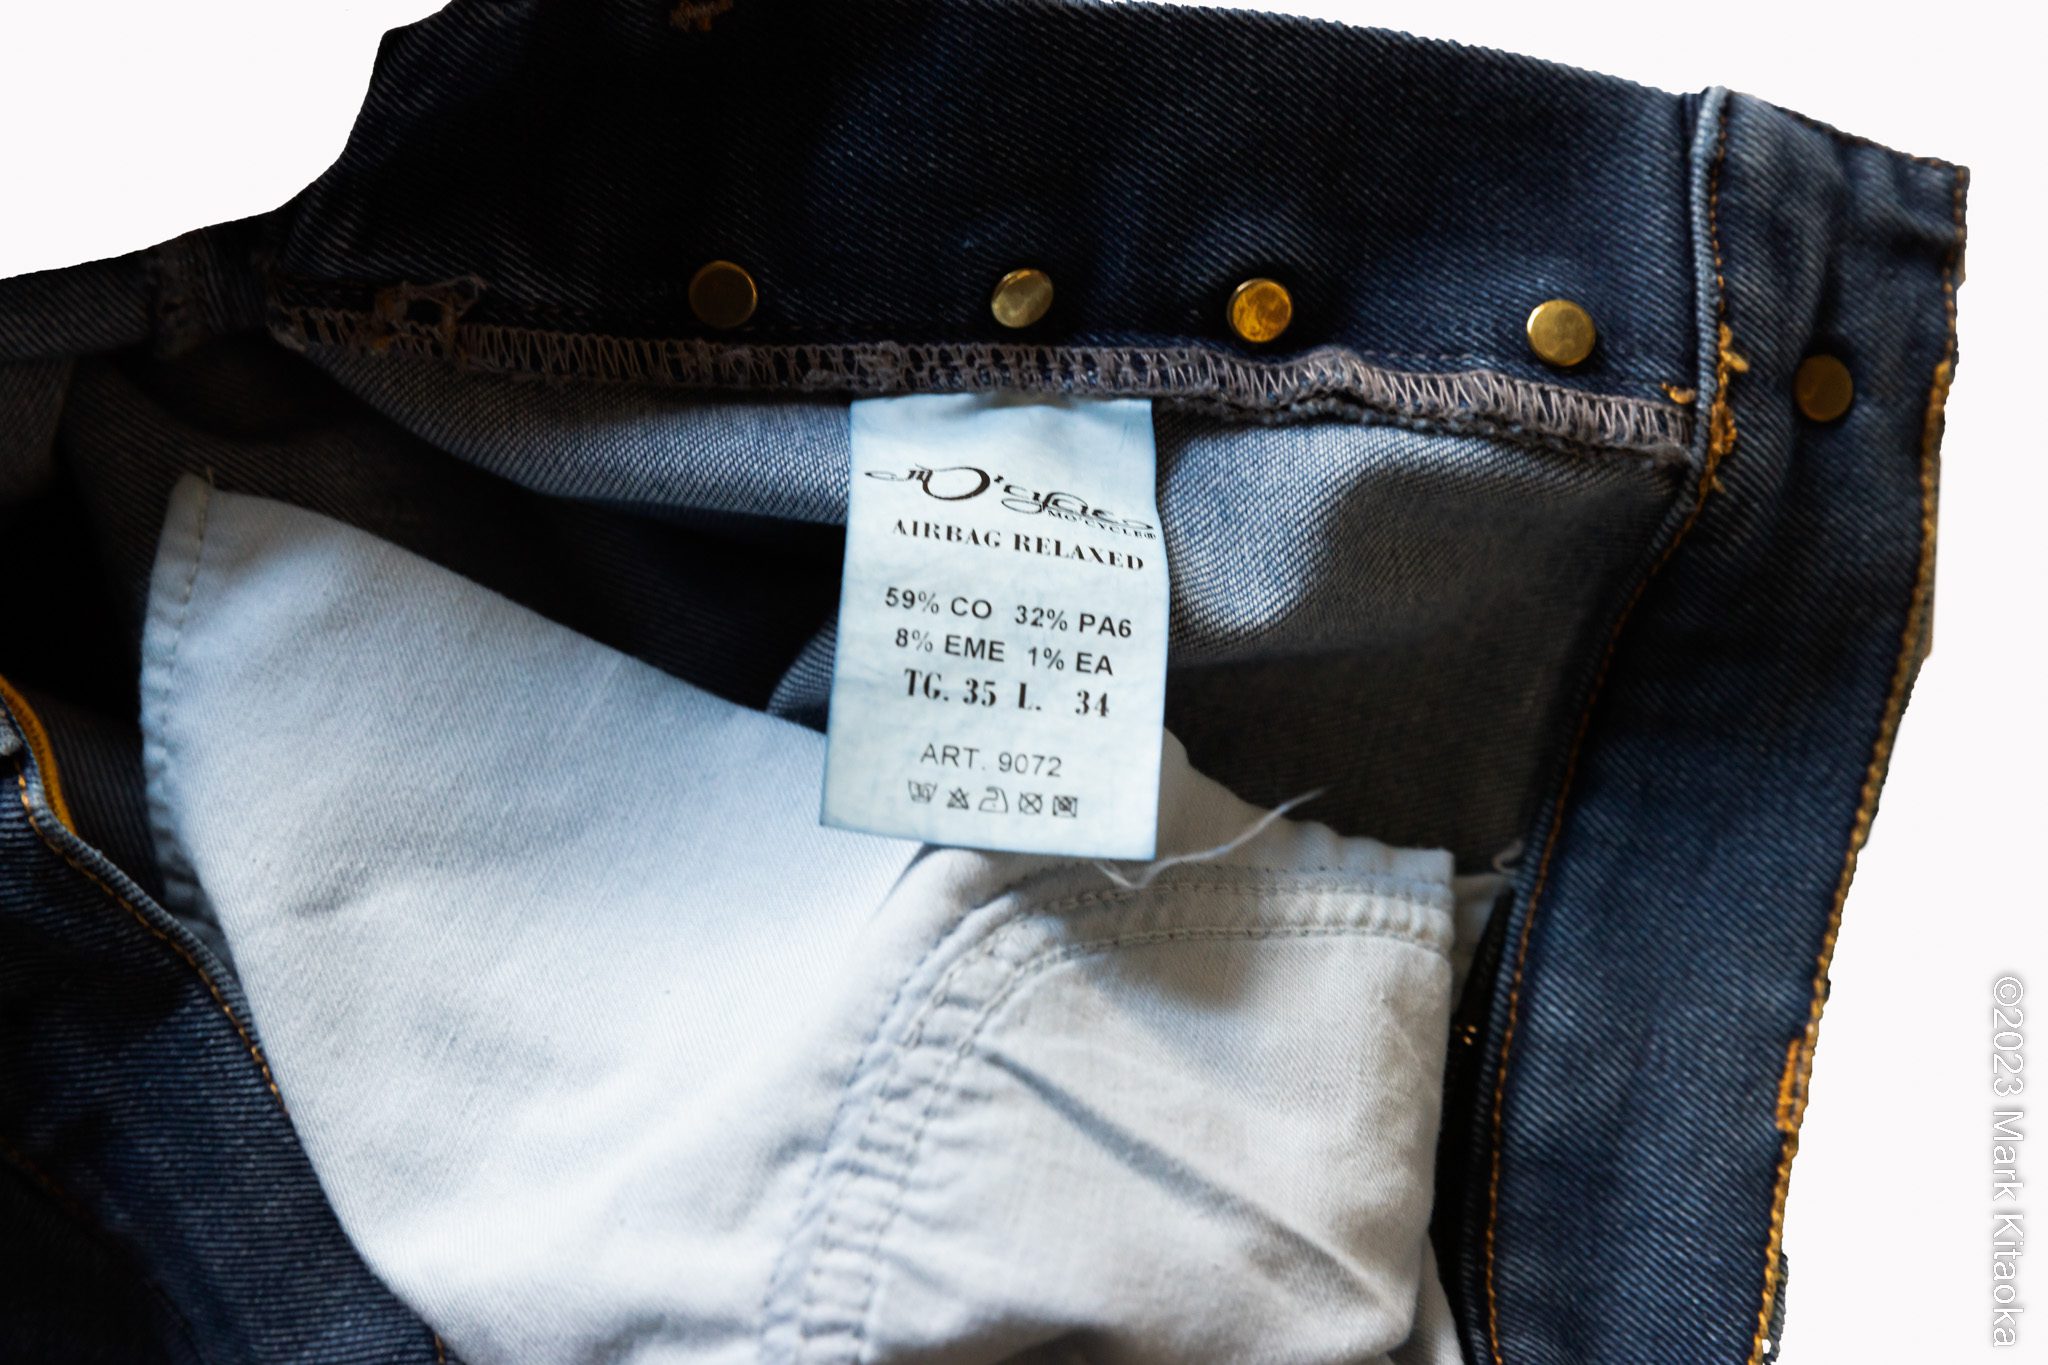 Interior tag on the jeans